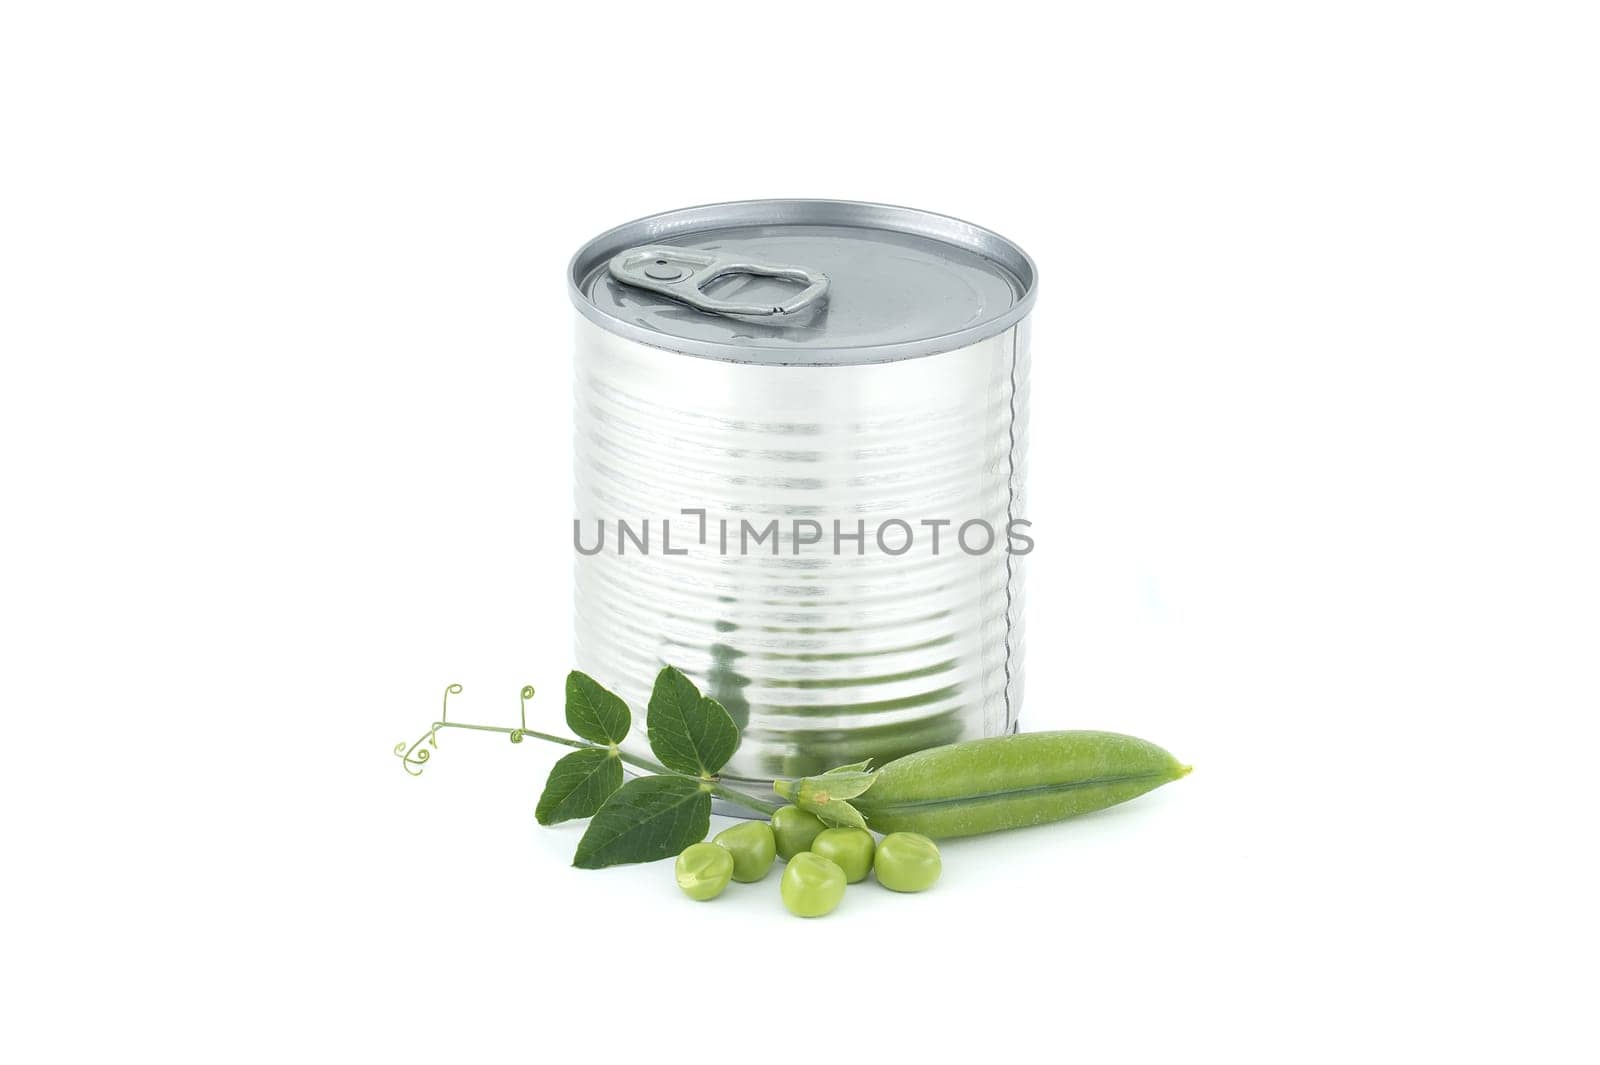 Tin can and fresh garden peas isolated on white by NetPix